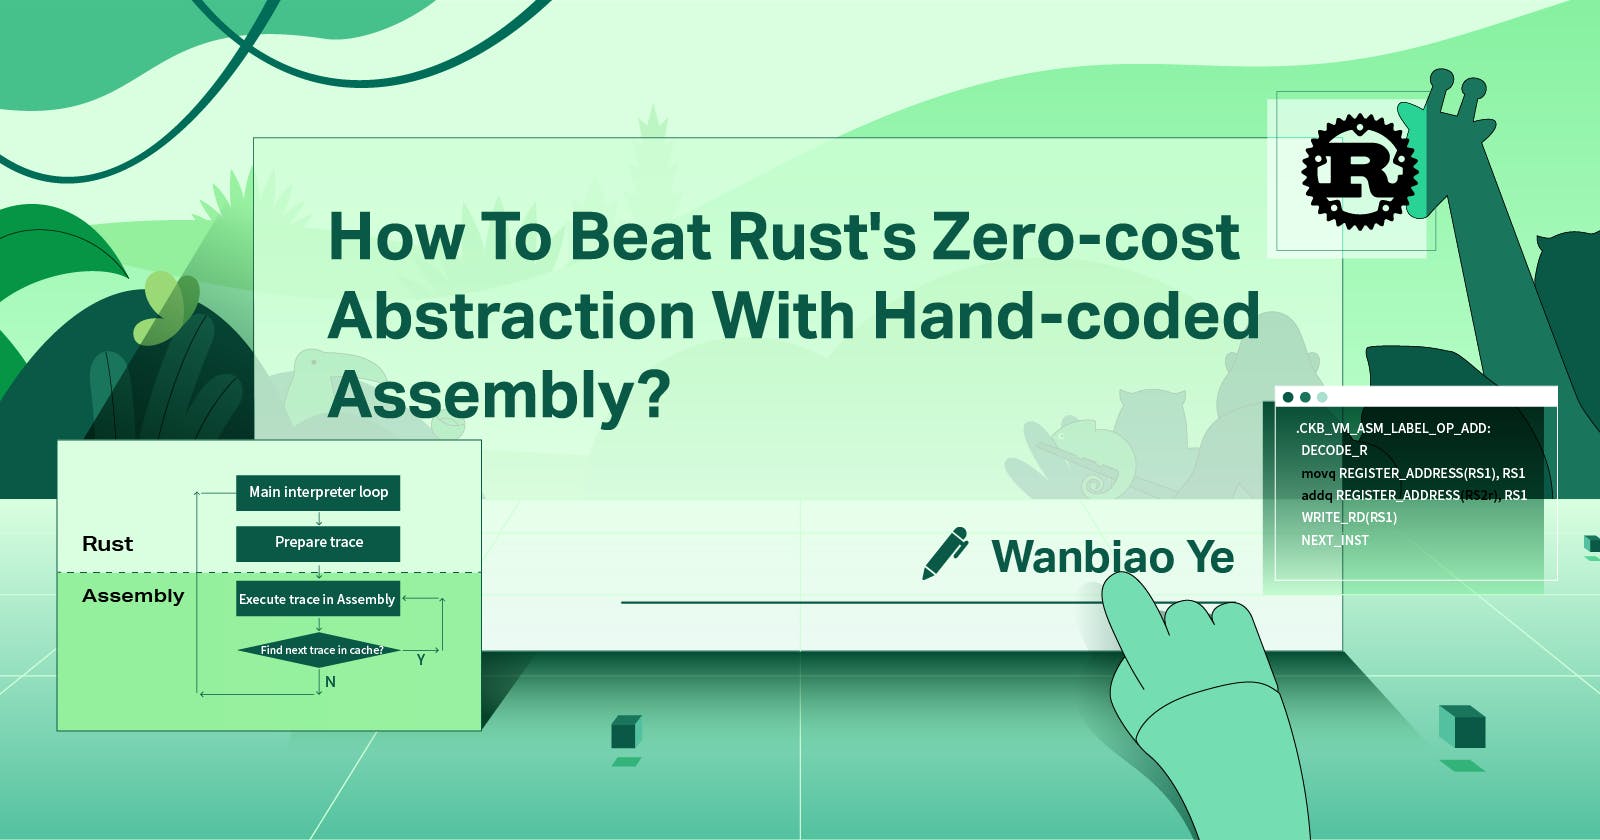 How To Beat Rust's Zero-Cost Abstraction With Hand-Coded Assembly?